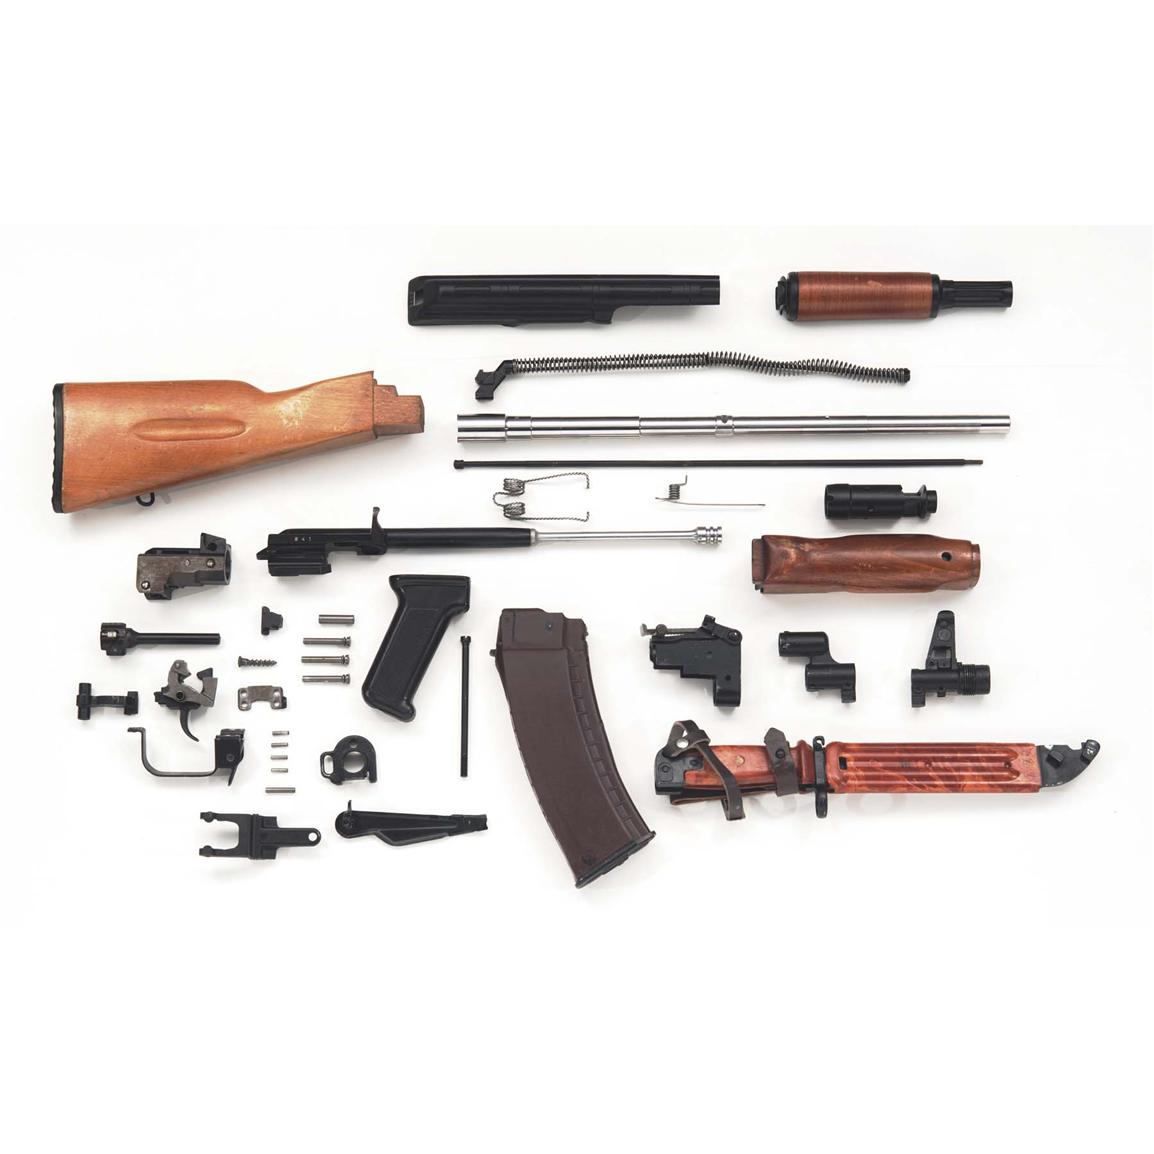 Bulgarian AK - Parts Kit - Tactical Rifle Accessories at Sportsman's Guide